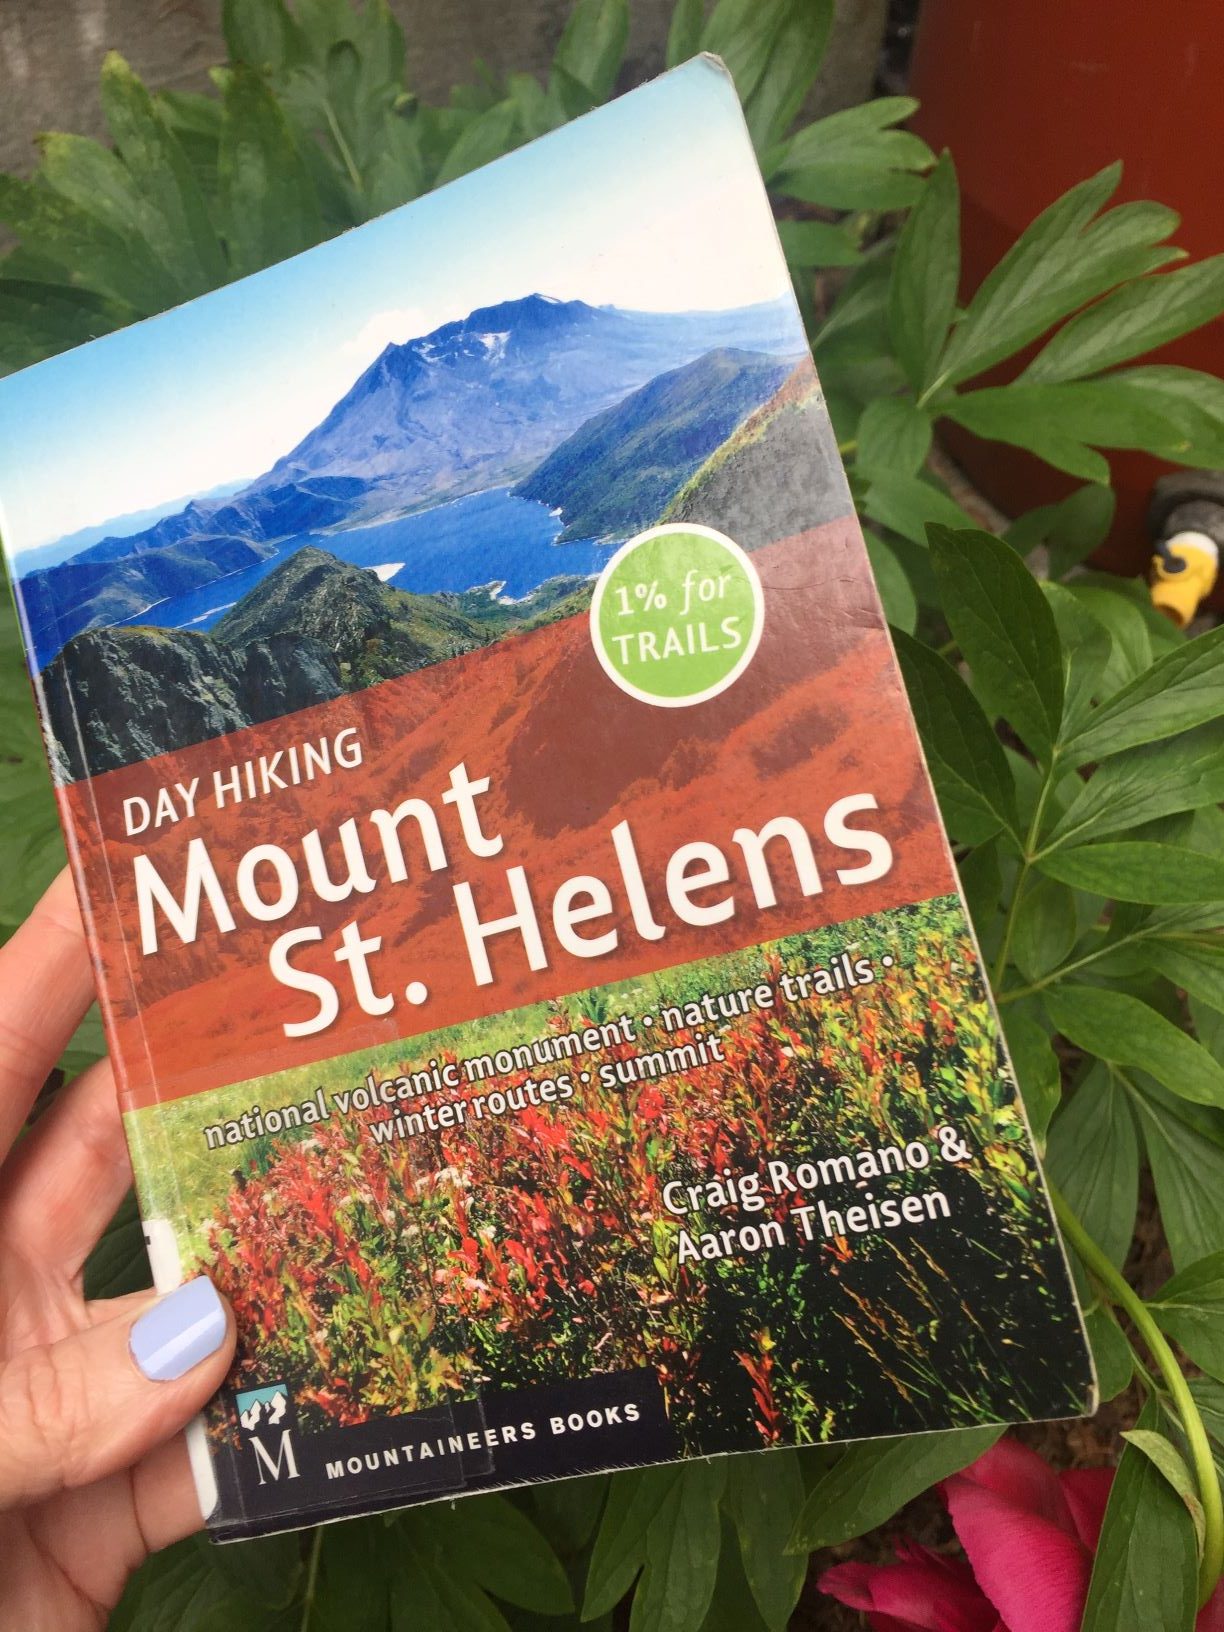 Find Cool Geology at Mount St. Helens